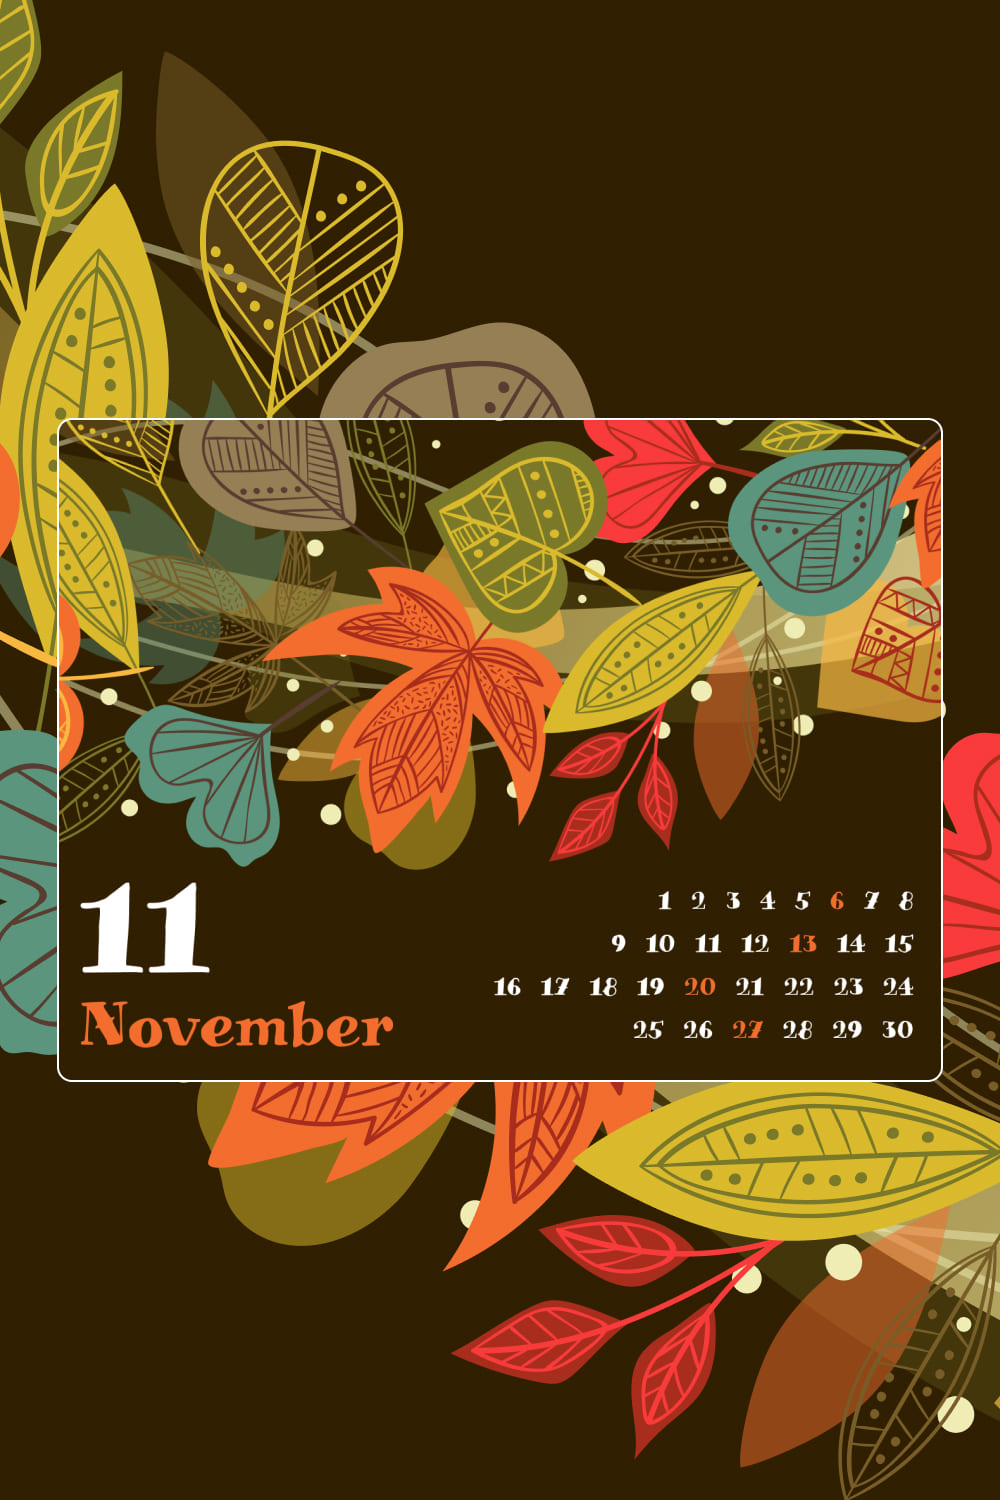 November calendar in brown color without title for Pinterest.